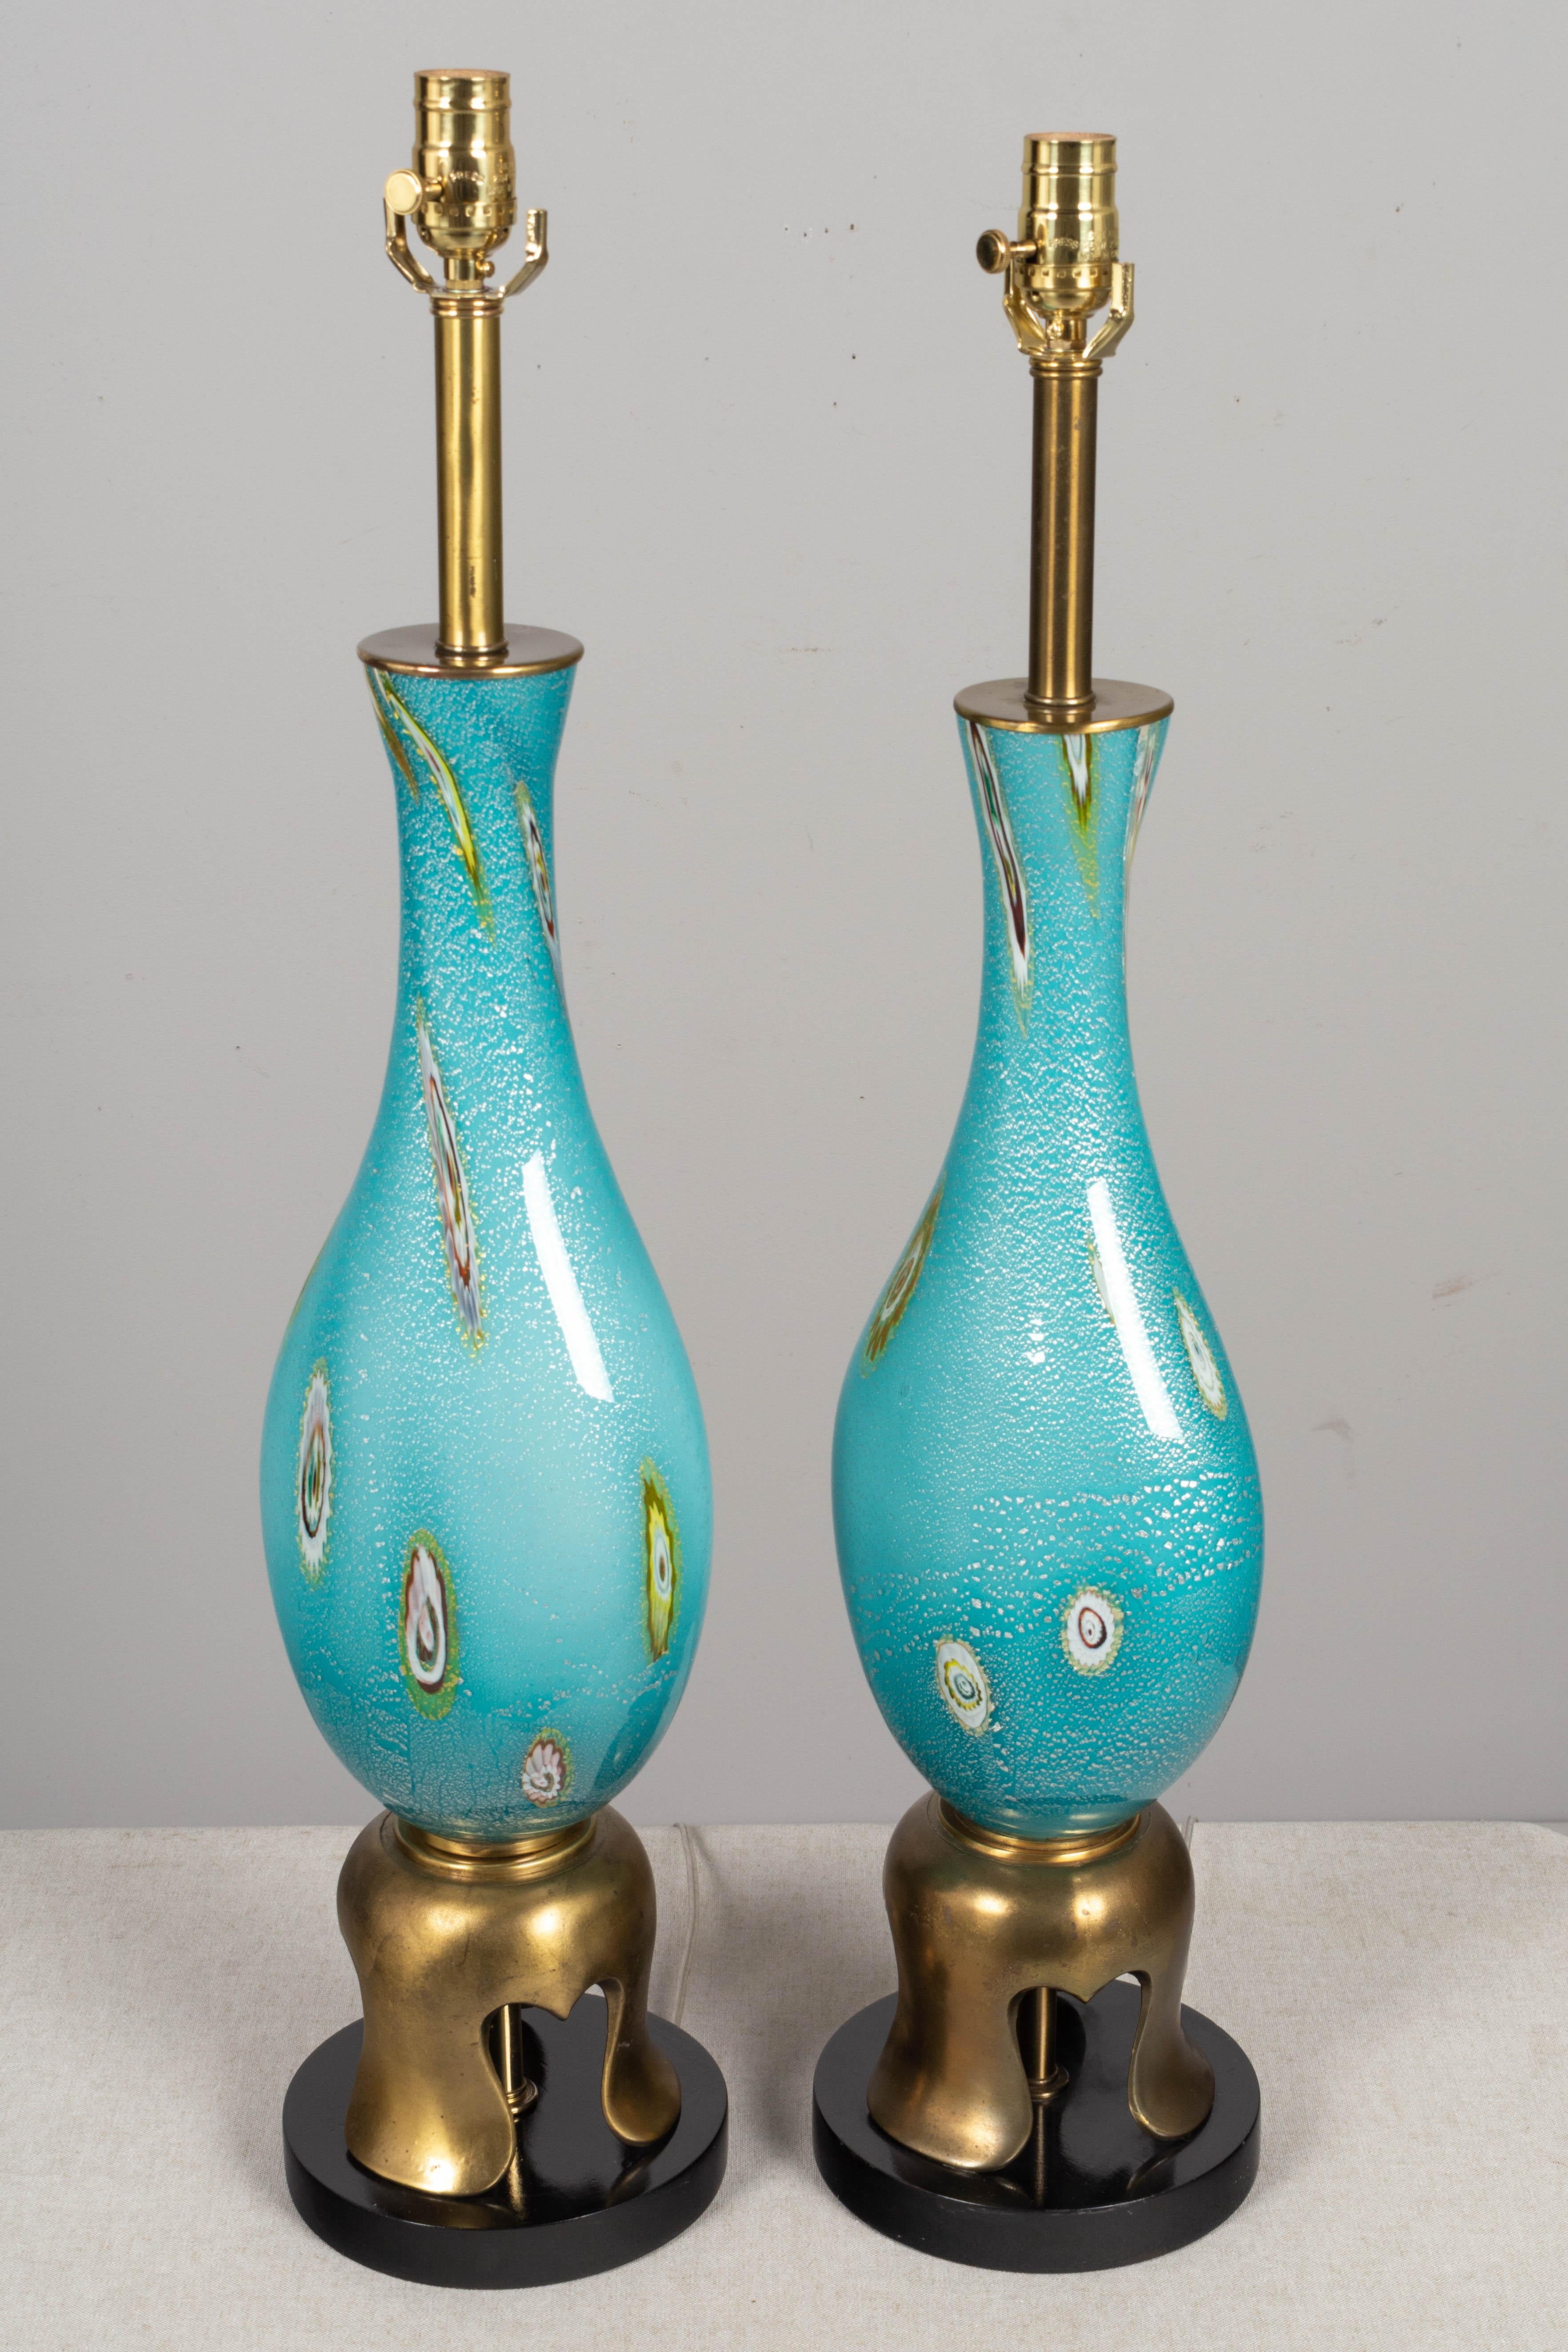 A pair of Mid Century Murano art glass table lamps by Barovier & Toso. Hand blown aqua blue glass with colorful murrines and silver foil. Original gold tone cast metal and black lacquered wood bases, in the style of James Mont. Red foil label on one